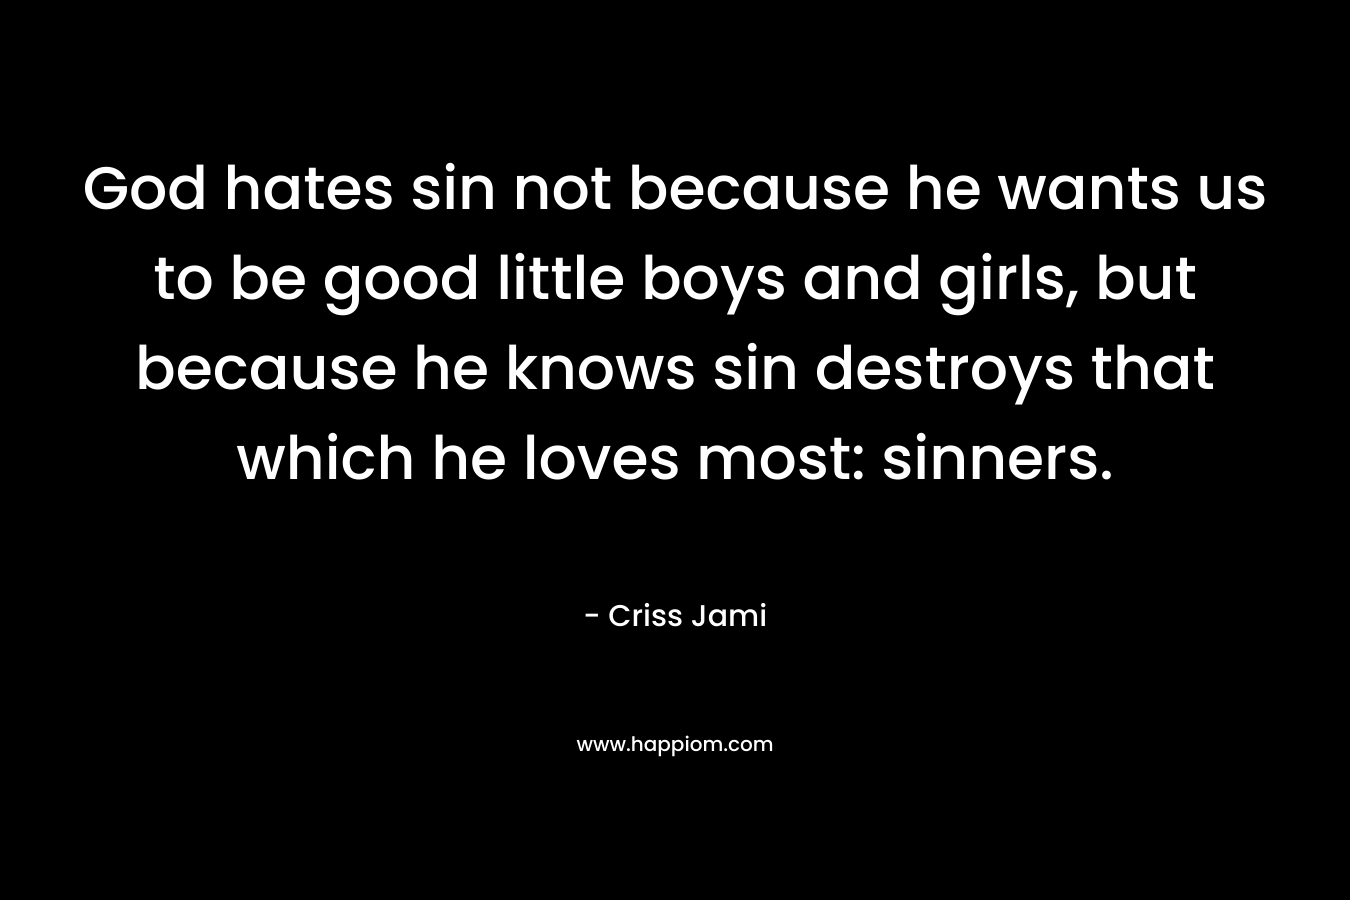 God hates sin not because he wants us to be good little boys and girls, but because he knows sin destroys that which he loves most: sinners.